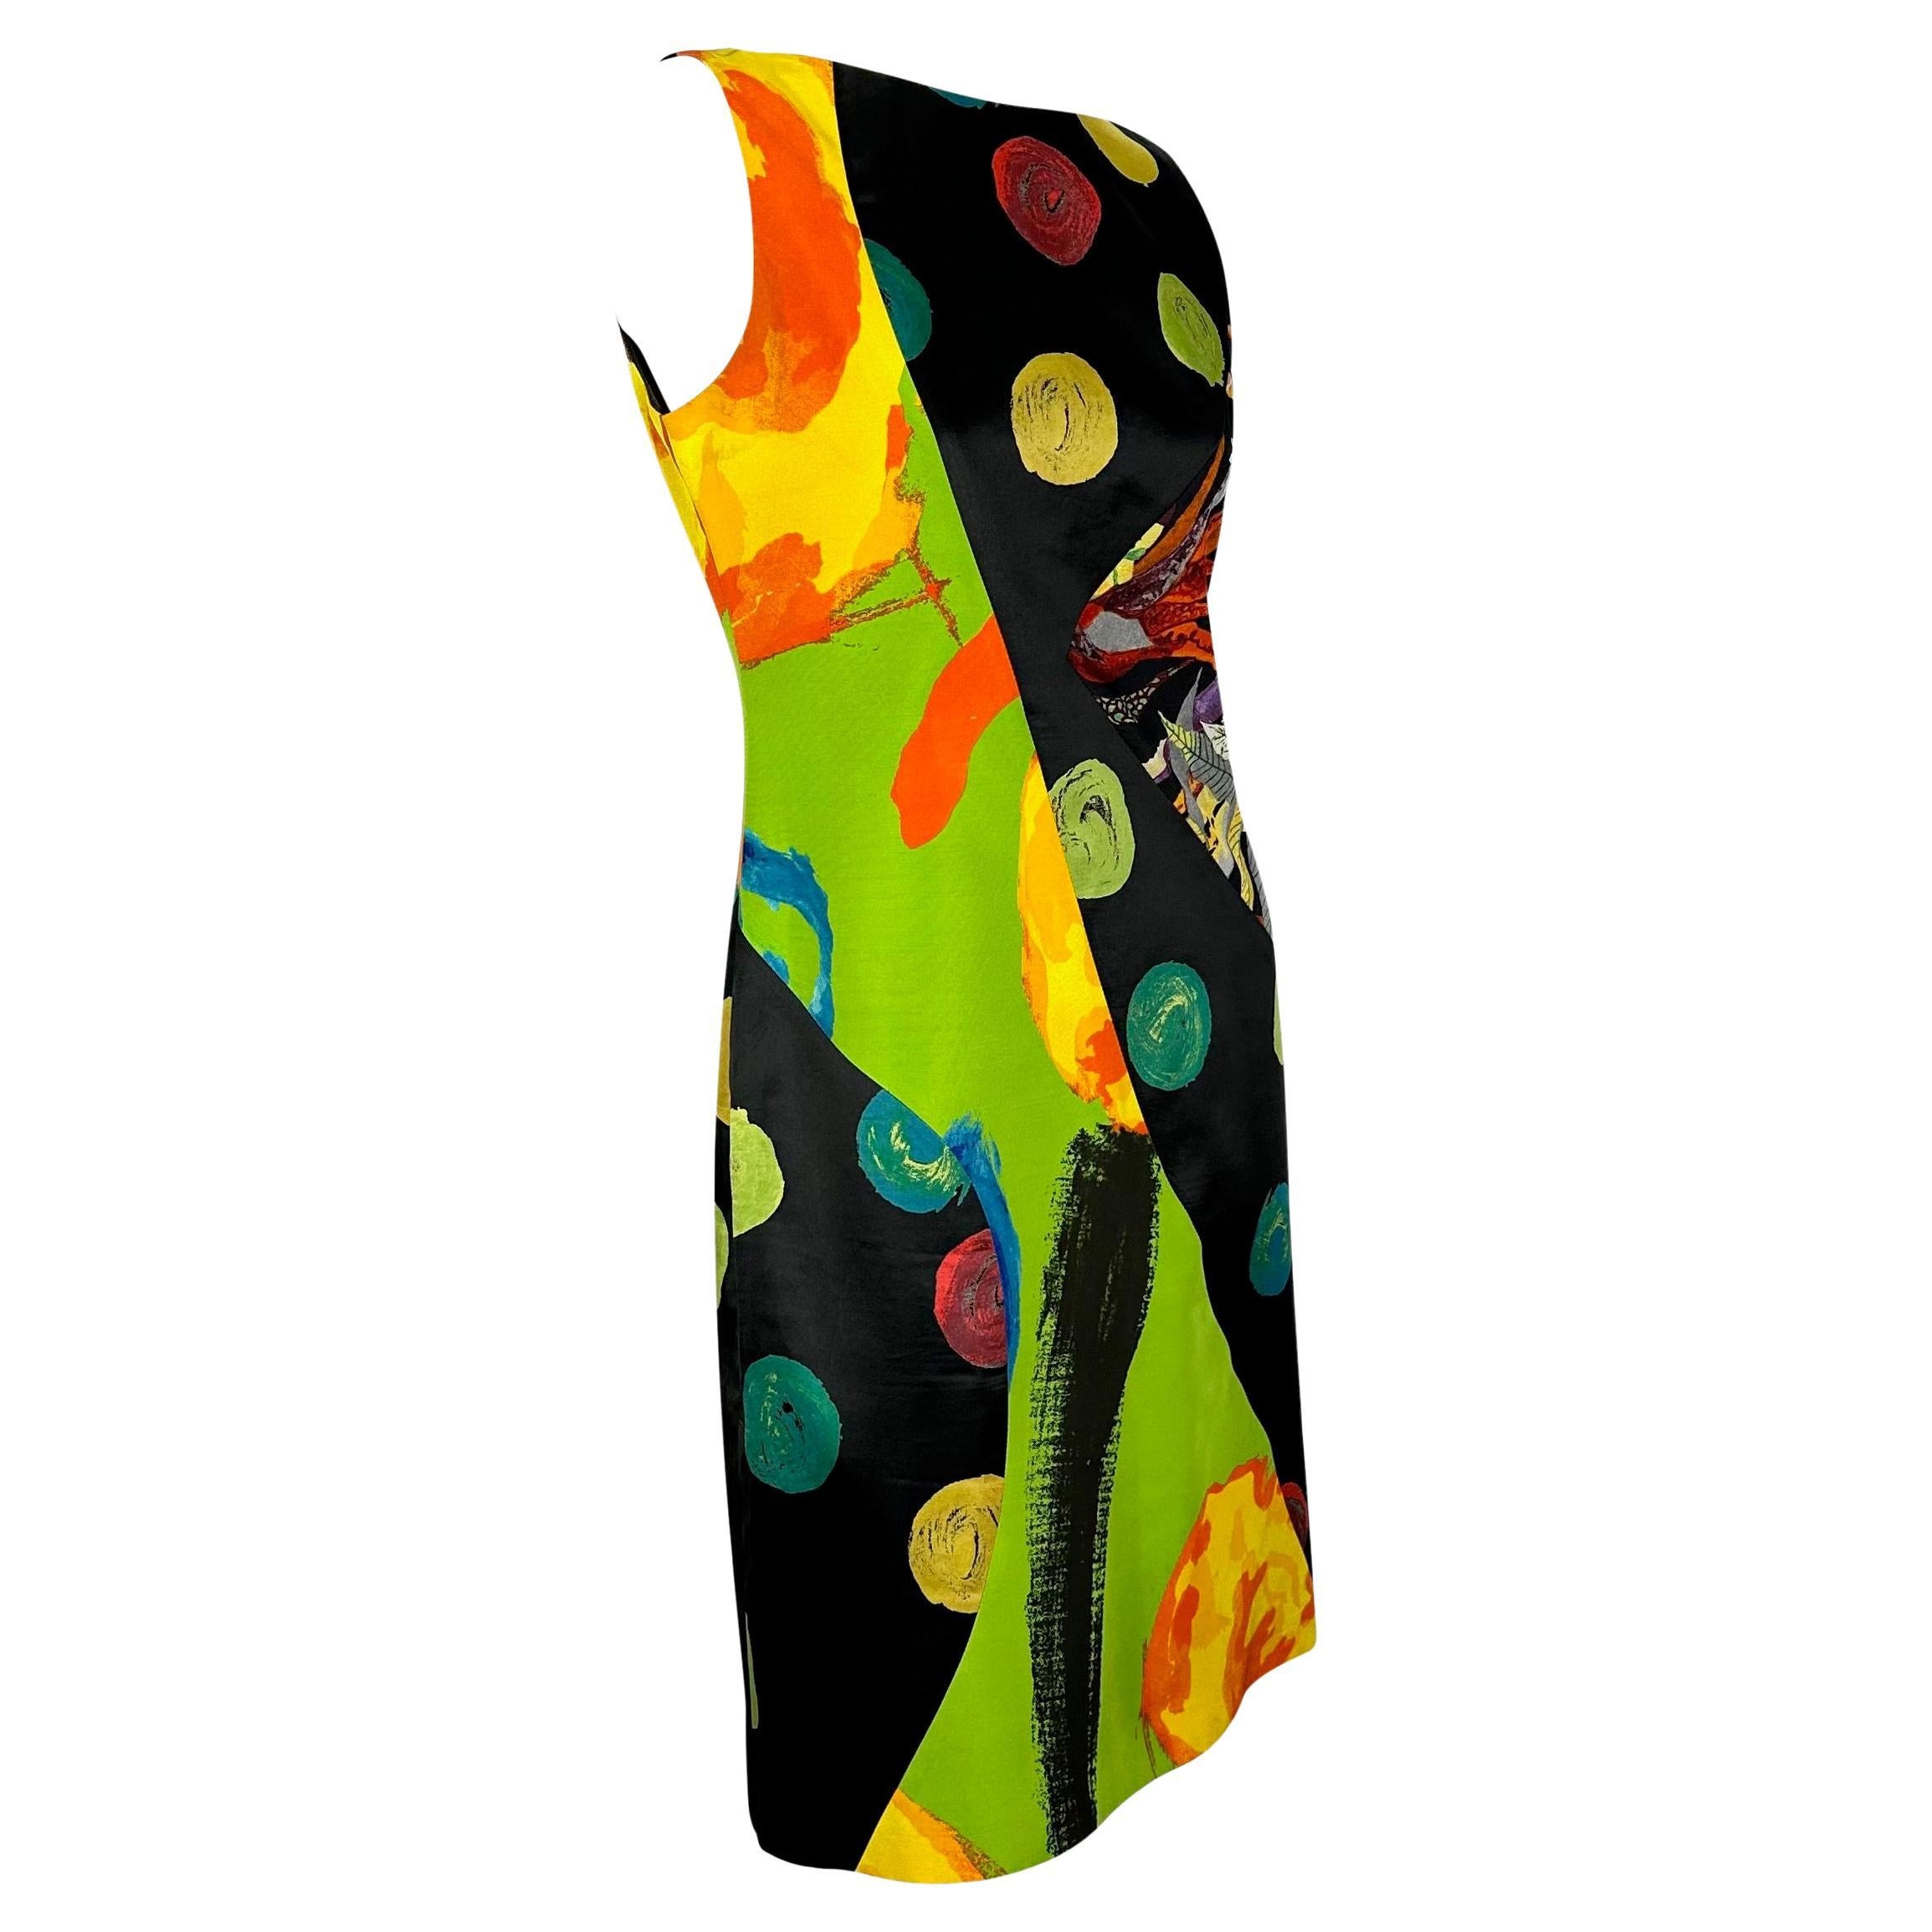 S/S 2000 Christian Lacroix Abstract Multicolor Print Panel Dress Runway  3